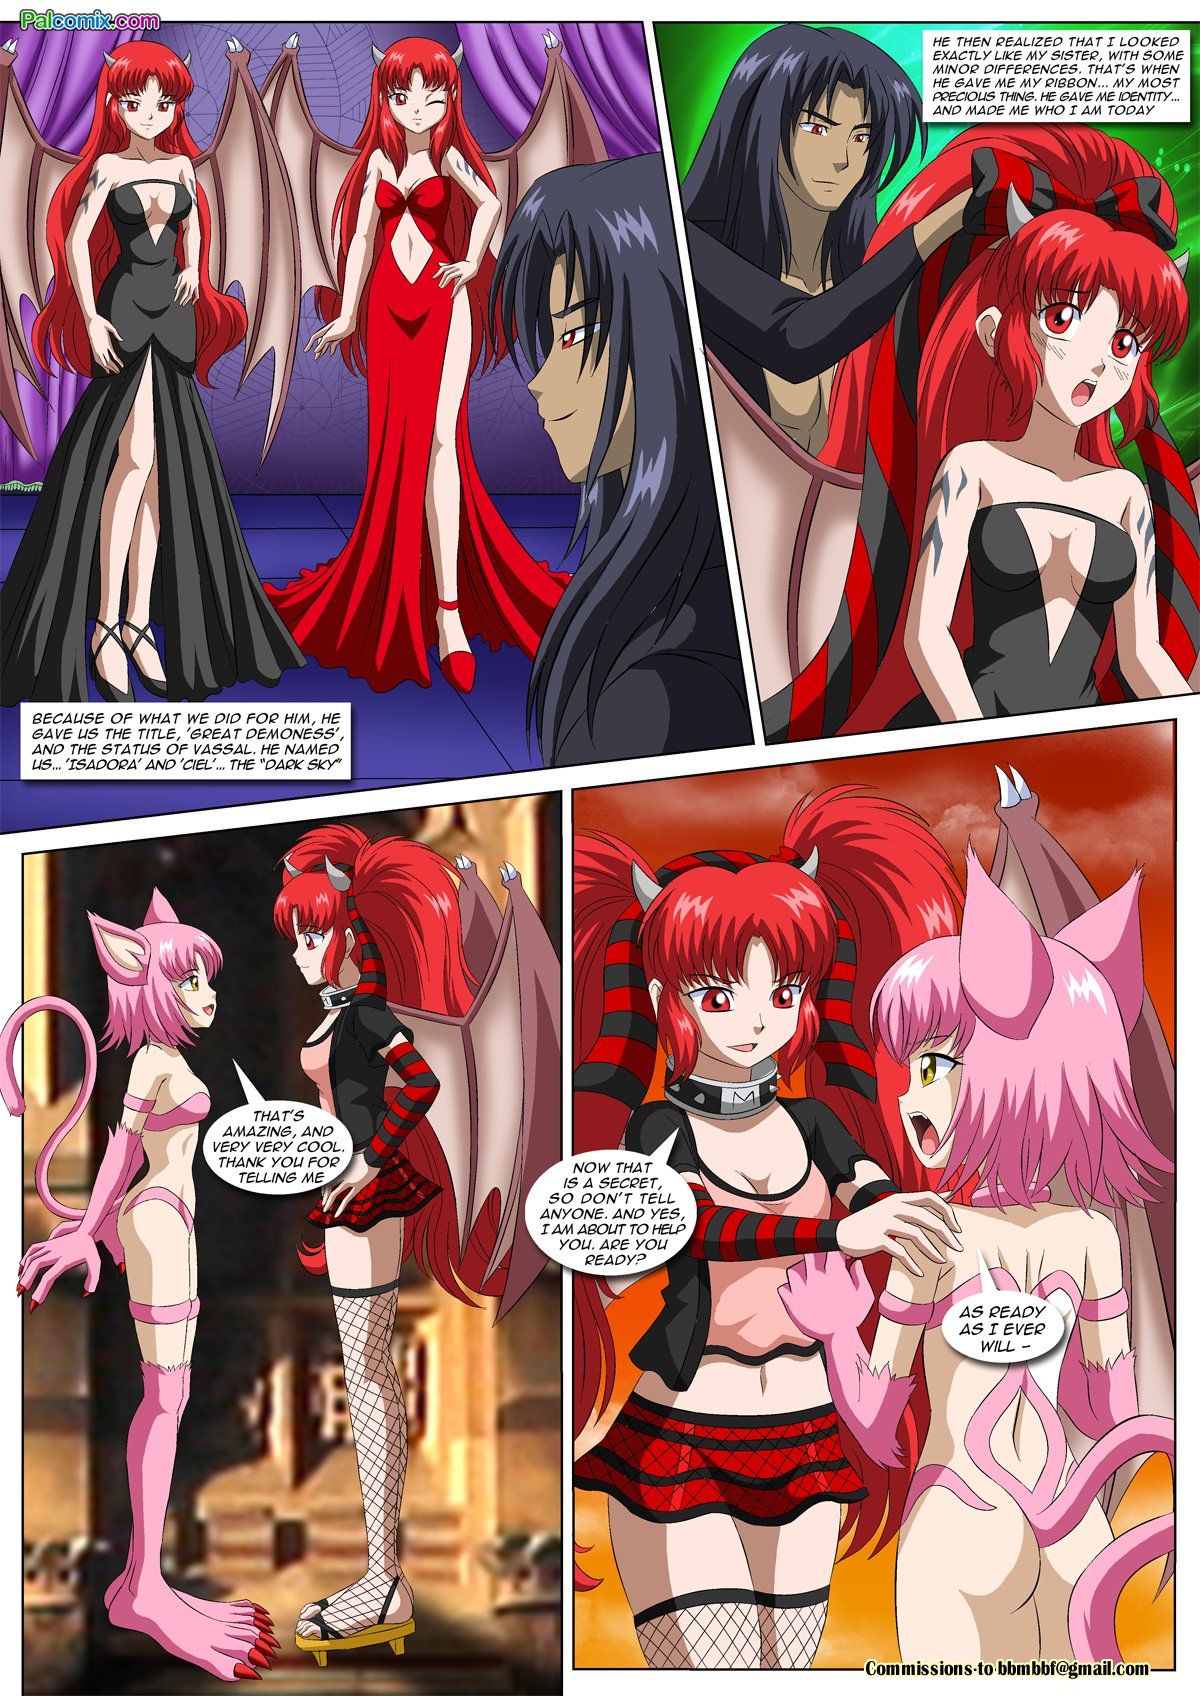 The Carnal Kingdom 6 - Angels and Demons page 44